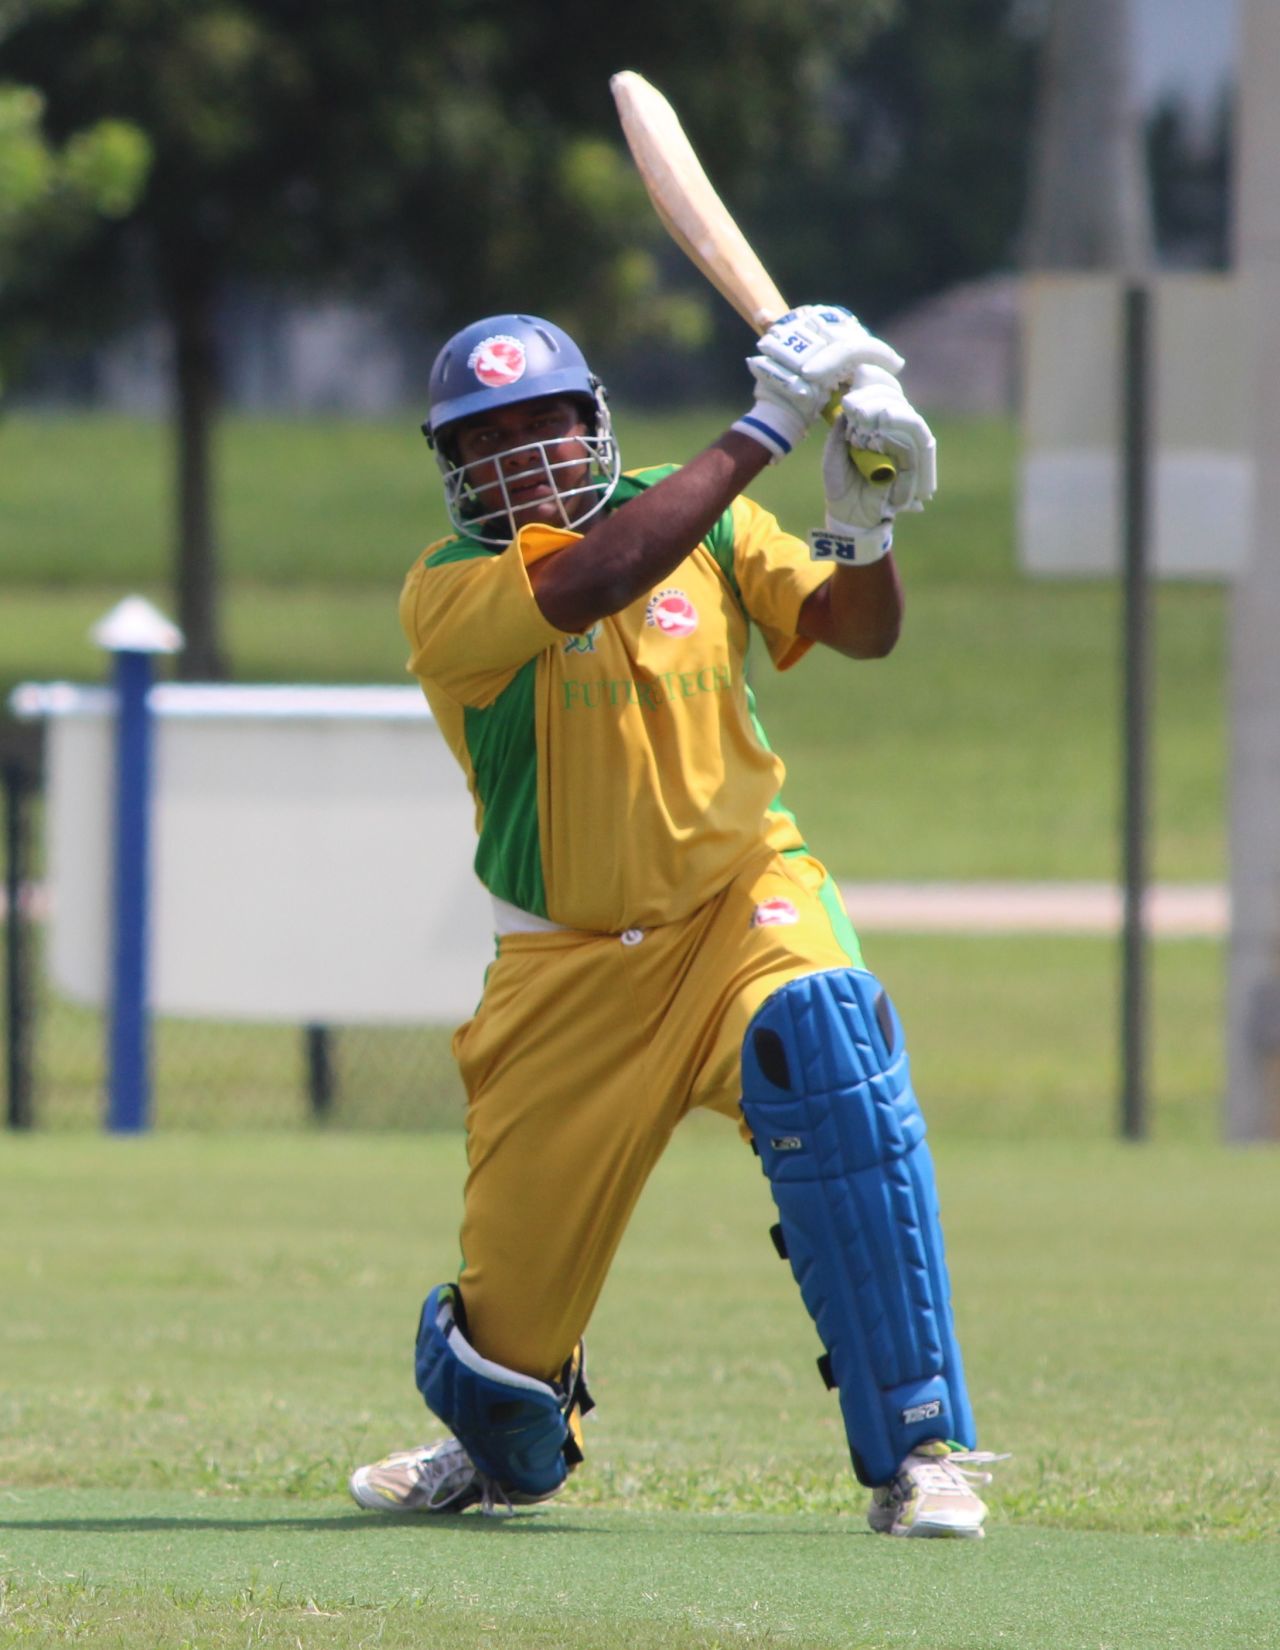 Aditya Thyagarajan completes a lofted drive over extra cover, North East v South West USACA T20 National Championship, Lauderhill, August 15, 2014